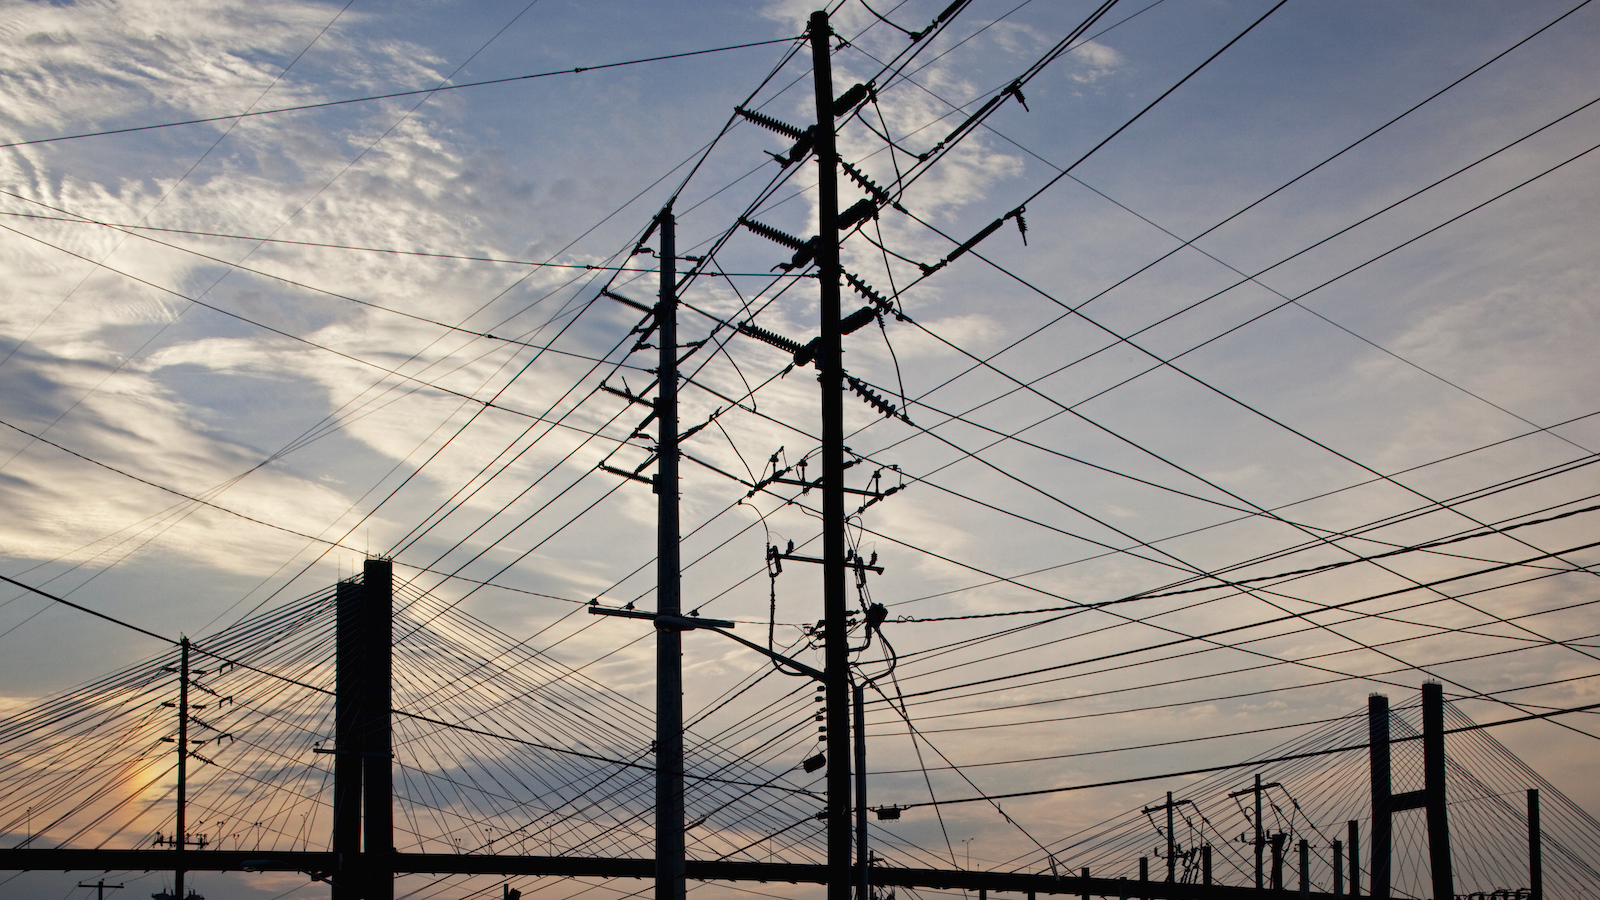 Power lines along the Savannah River at dusk form a pattern of intersecting lines with the cables of the Talmadge Memorial Bridge in the distance